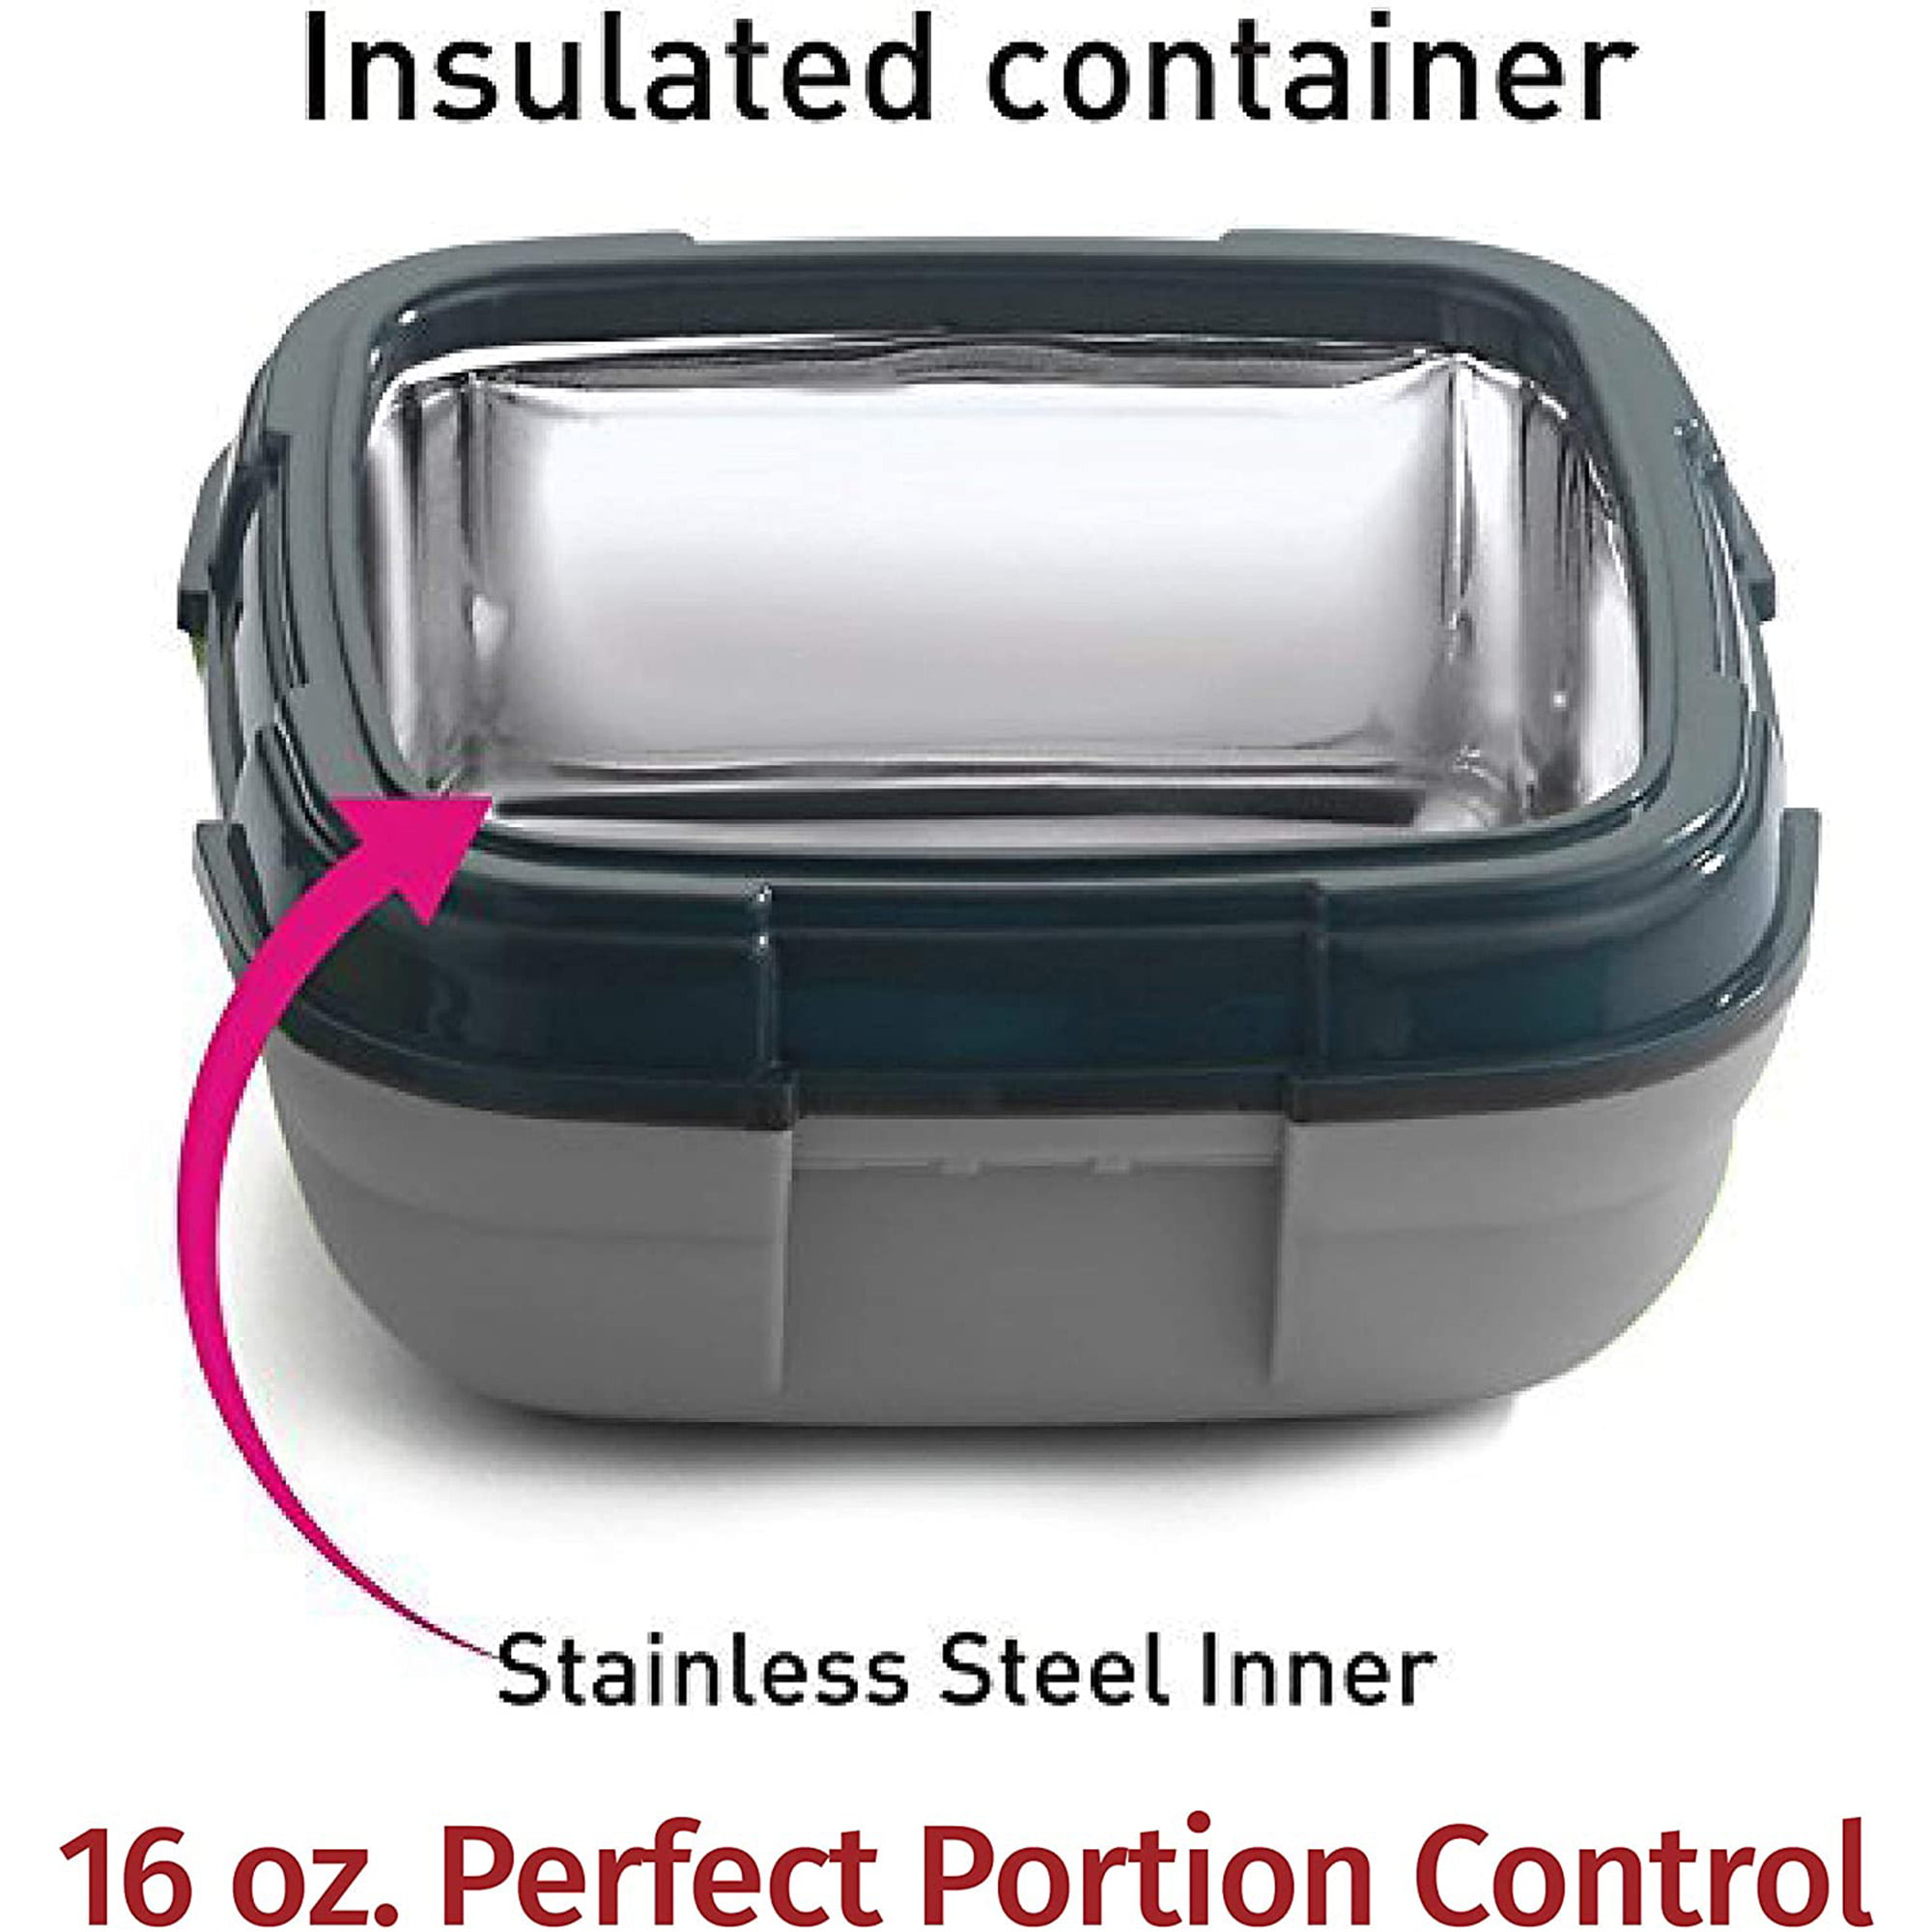 Pinnacle PentaGo Thermoware Insulated Tiffin Box, Adjustable